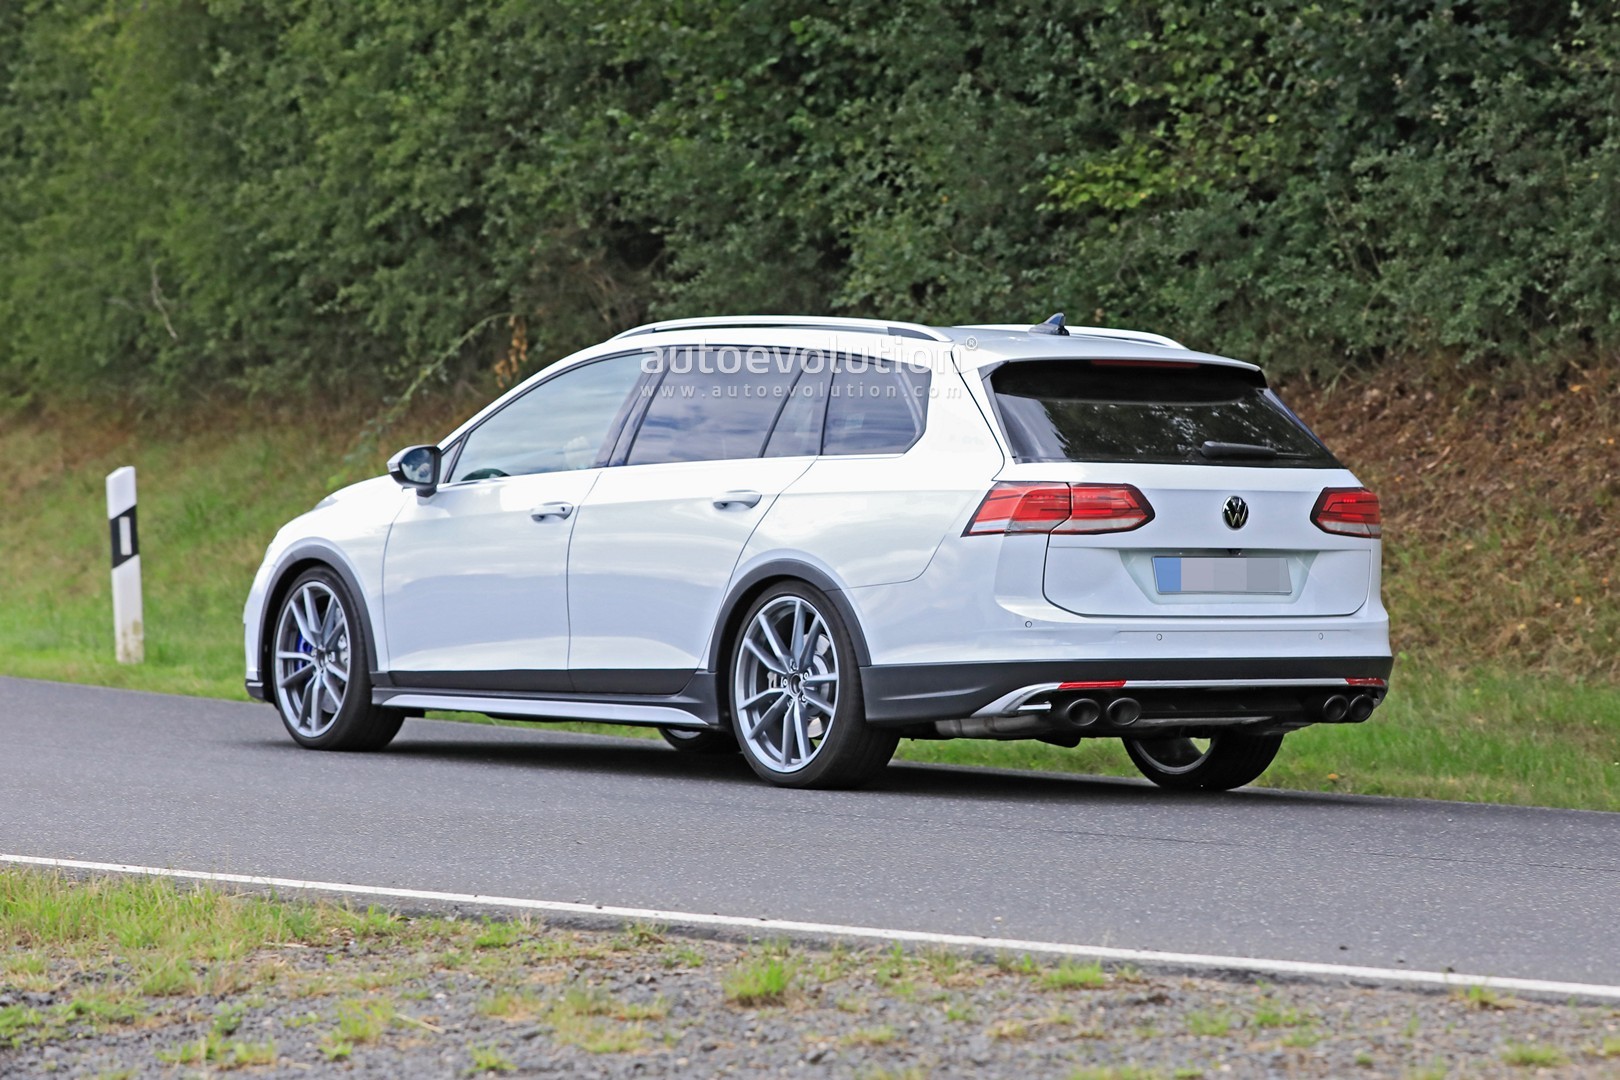 2020 - [Volkswagen] Golf VIII - Page 19 Volkswagen-making-a-golf-r-wagon-with-audi-s4-power-that-looks-line-an-alltrack_23